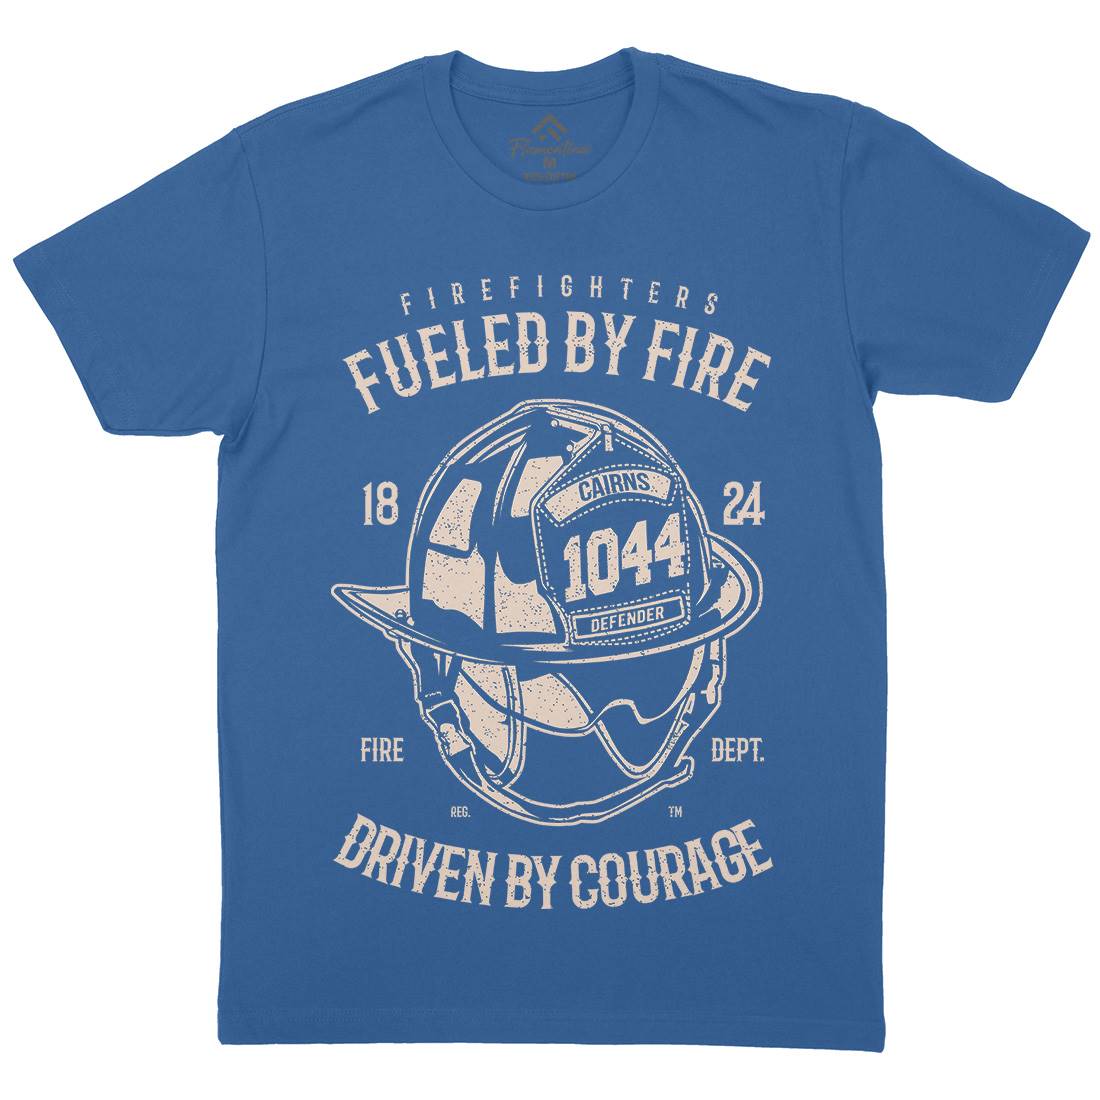 Fuelled By Fire Mens Crew Neck T-Shirt Firefighters A667